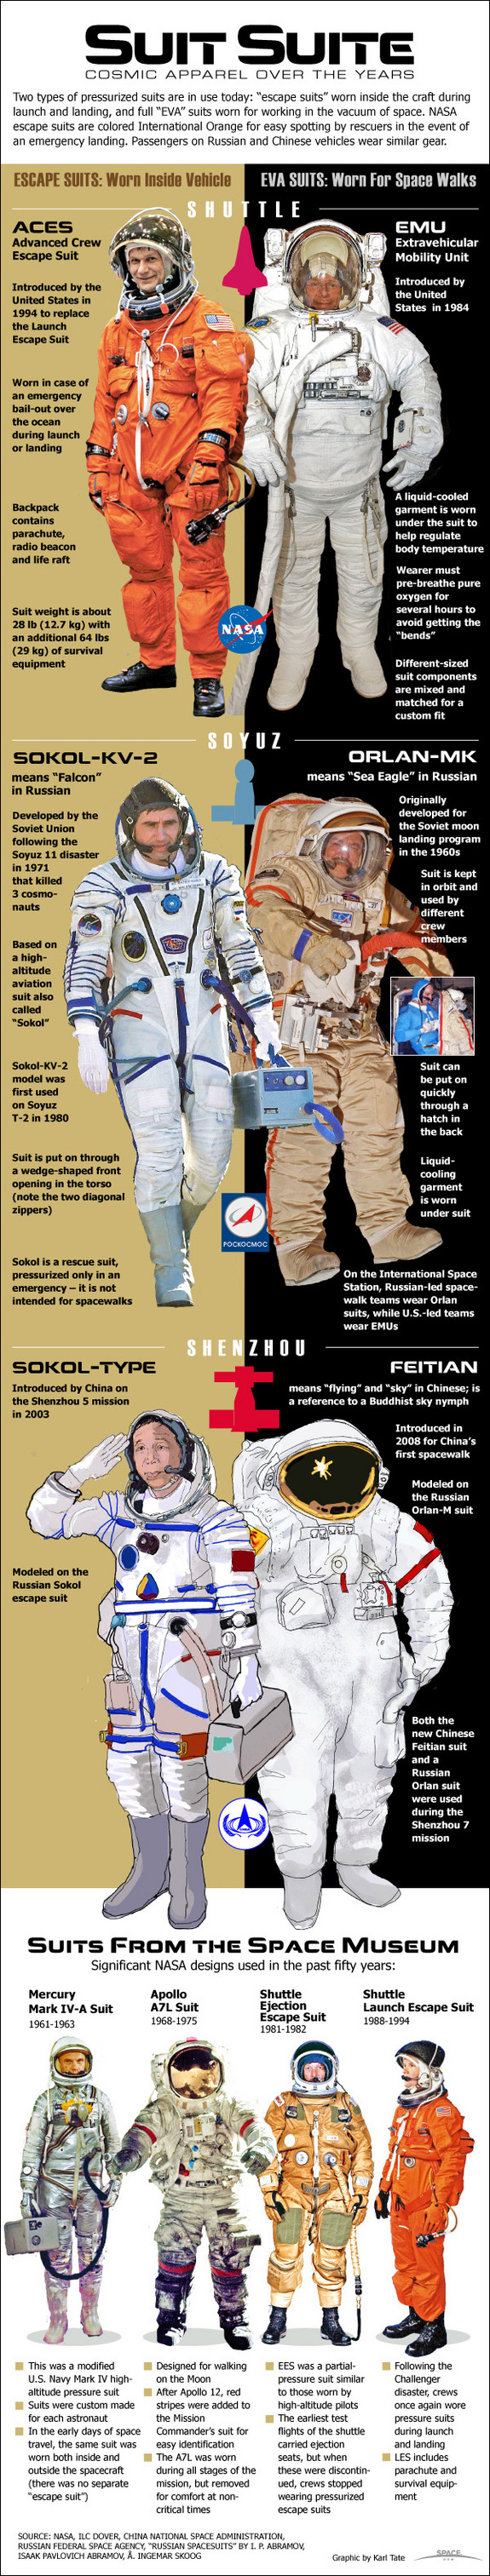 We review NASA's space suit cosmic apparel throughout history for the American, Russian and Chinese space programs.